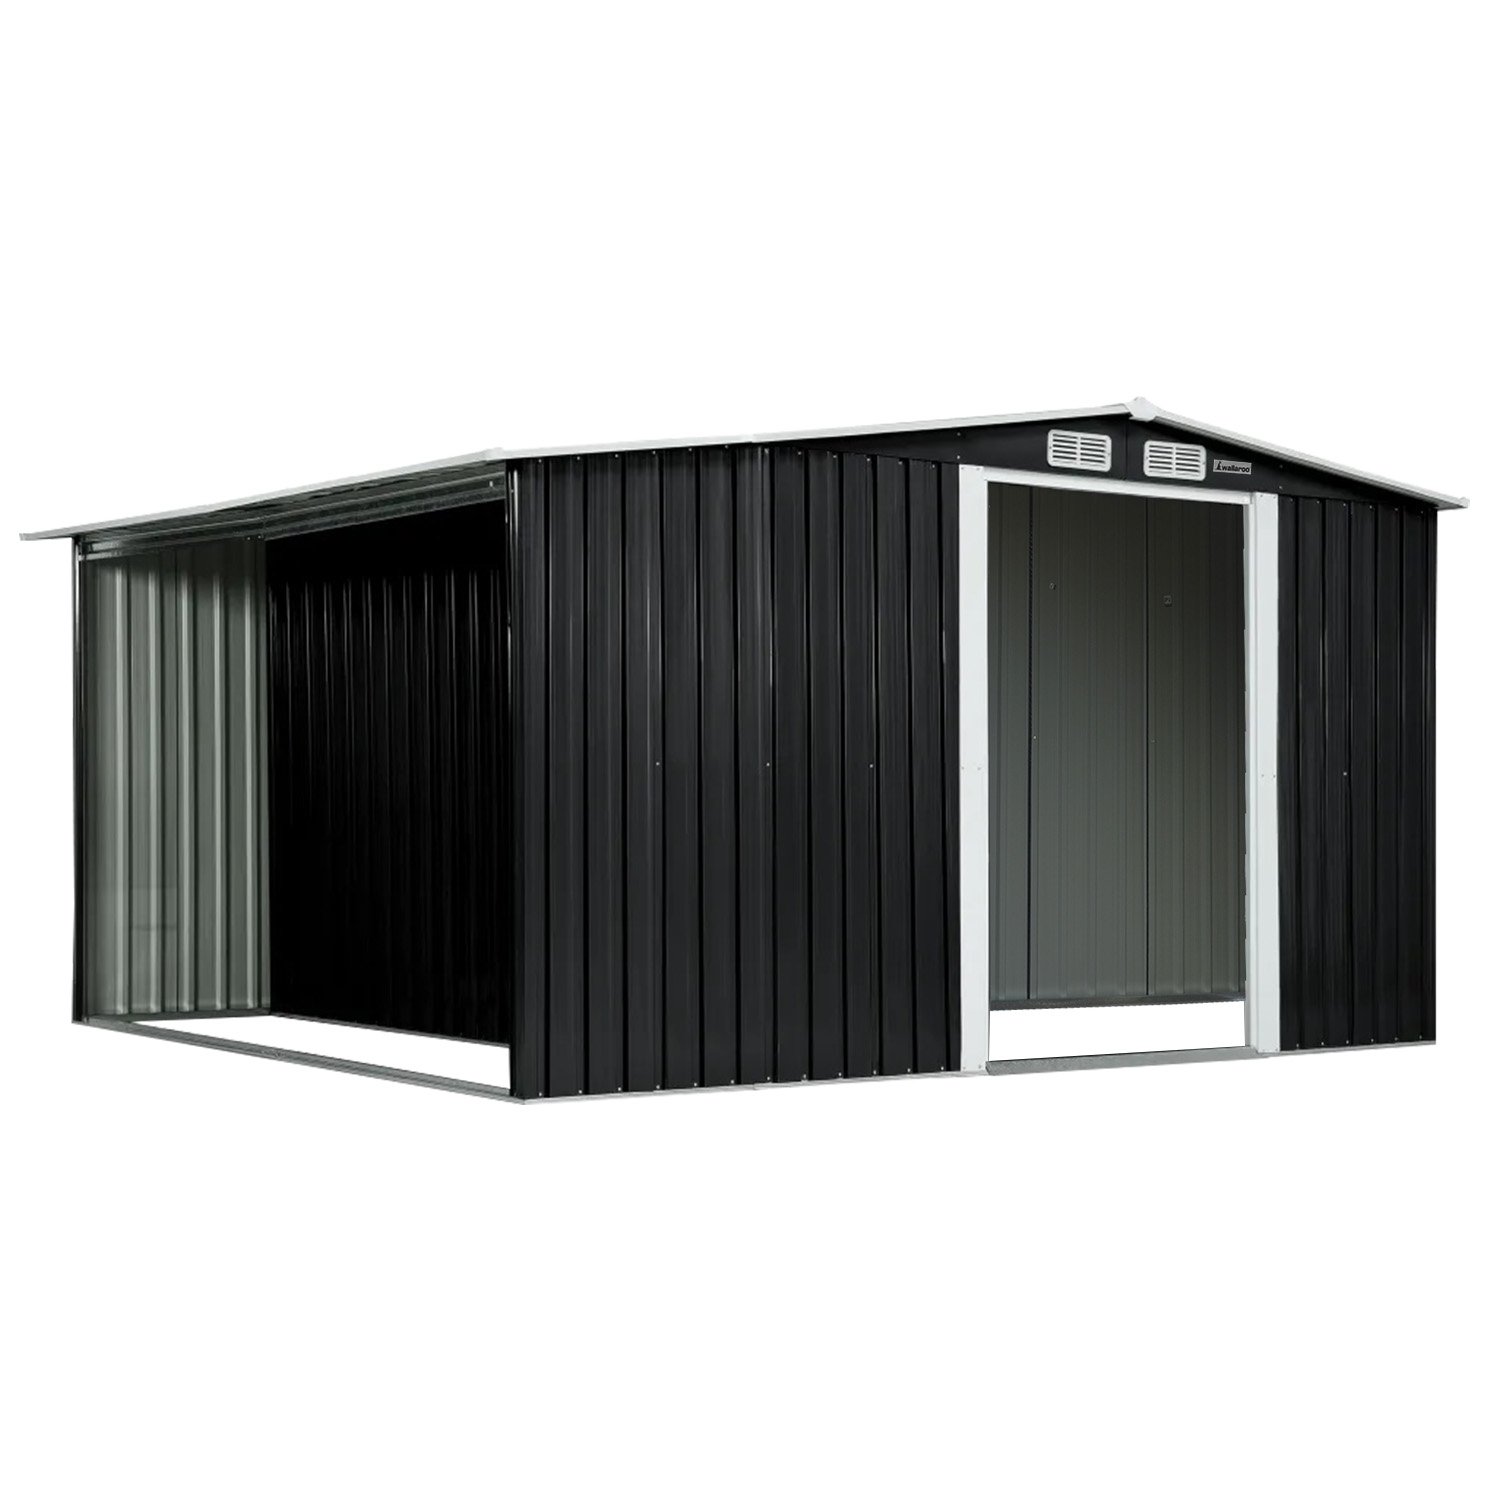 Wallaroo Garden Shed with Semi-Closed Storage 8*8FT - Black 1